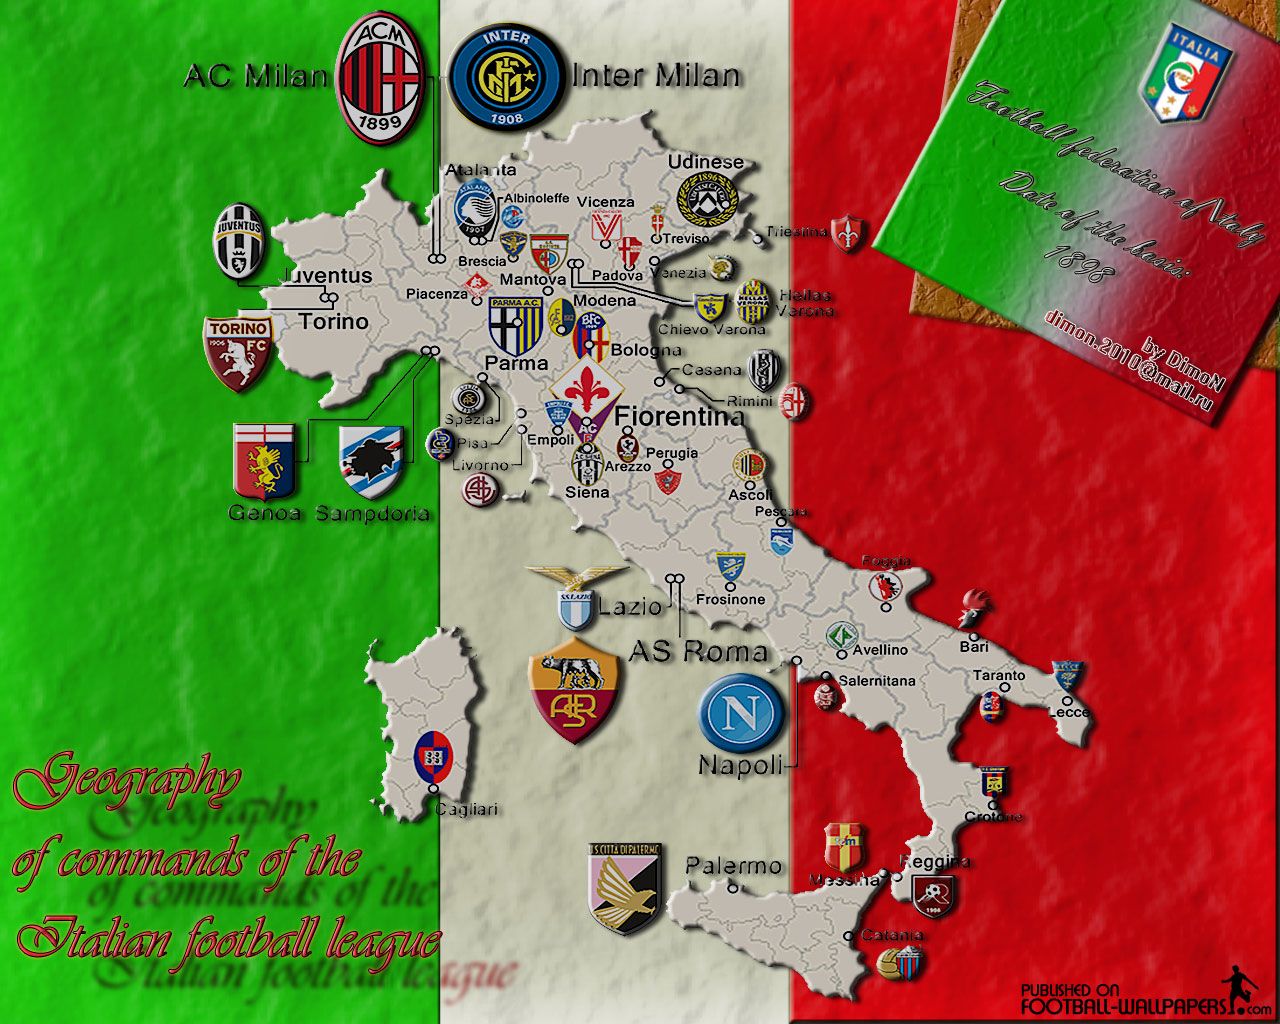 Italian Clubs Wallpaper #1 | Football Wallpapers and Videos